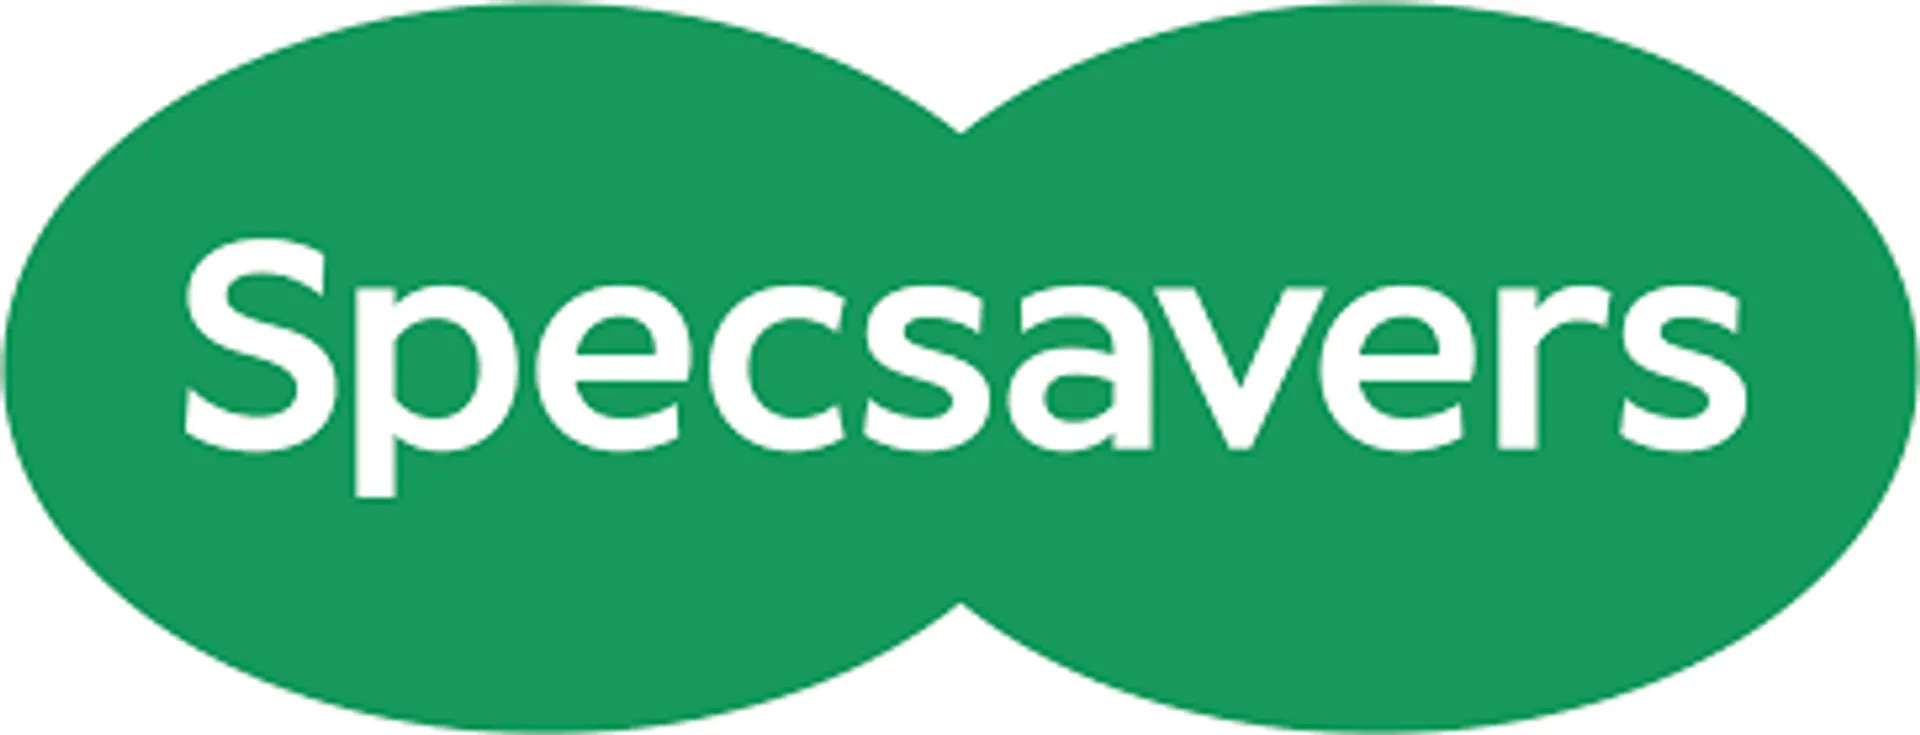 SPECSAVERS logo current weekly ad